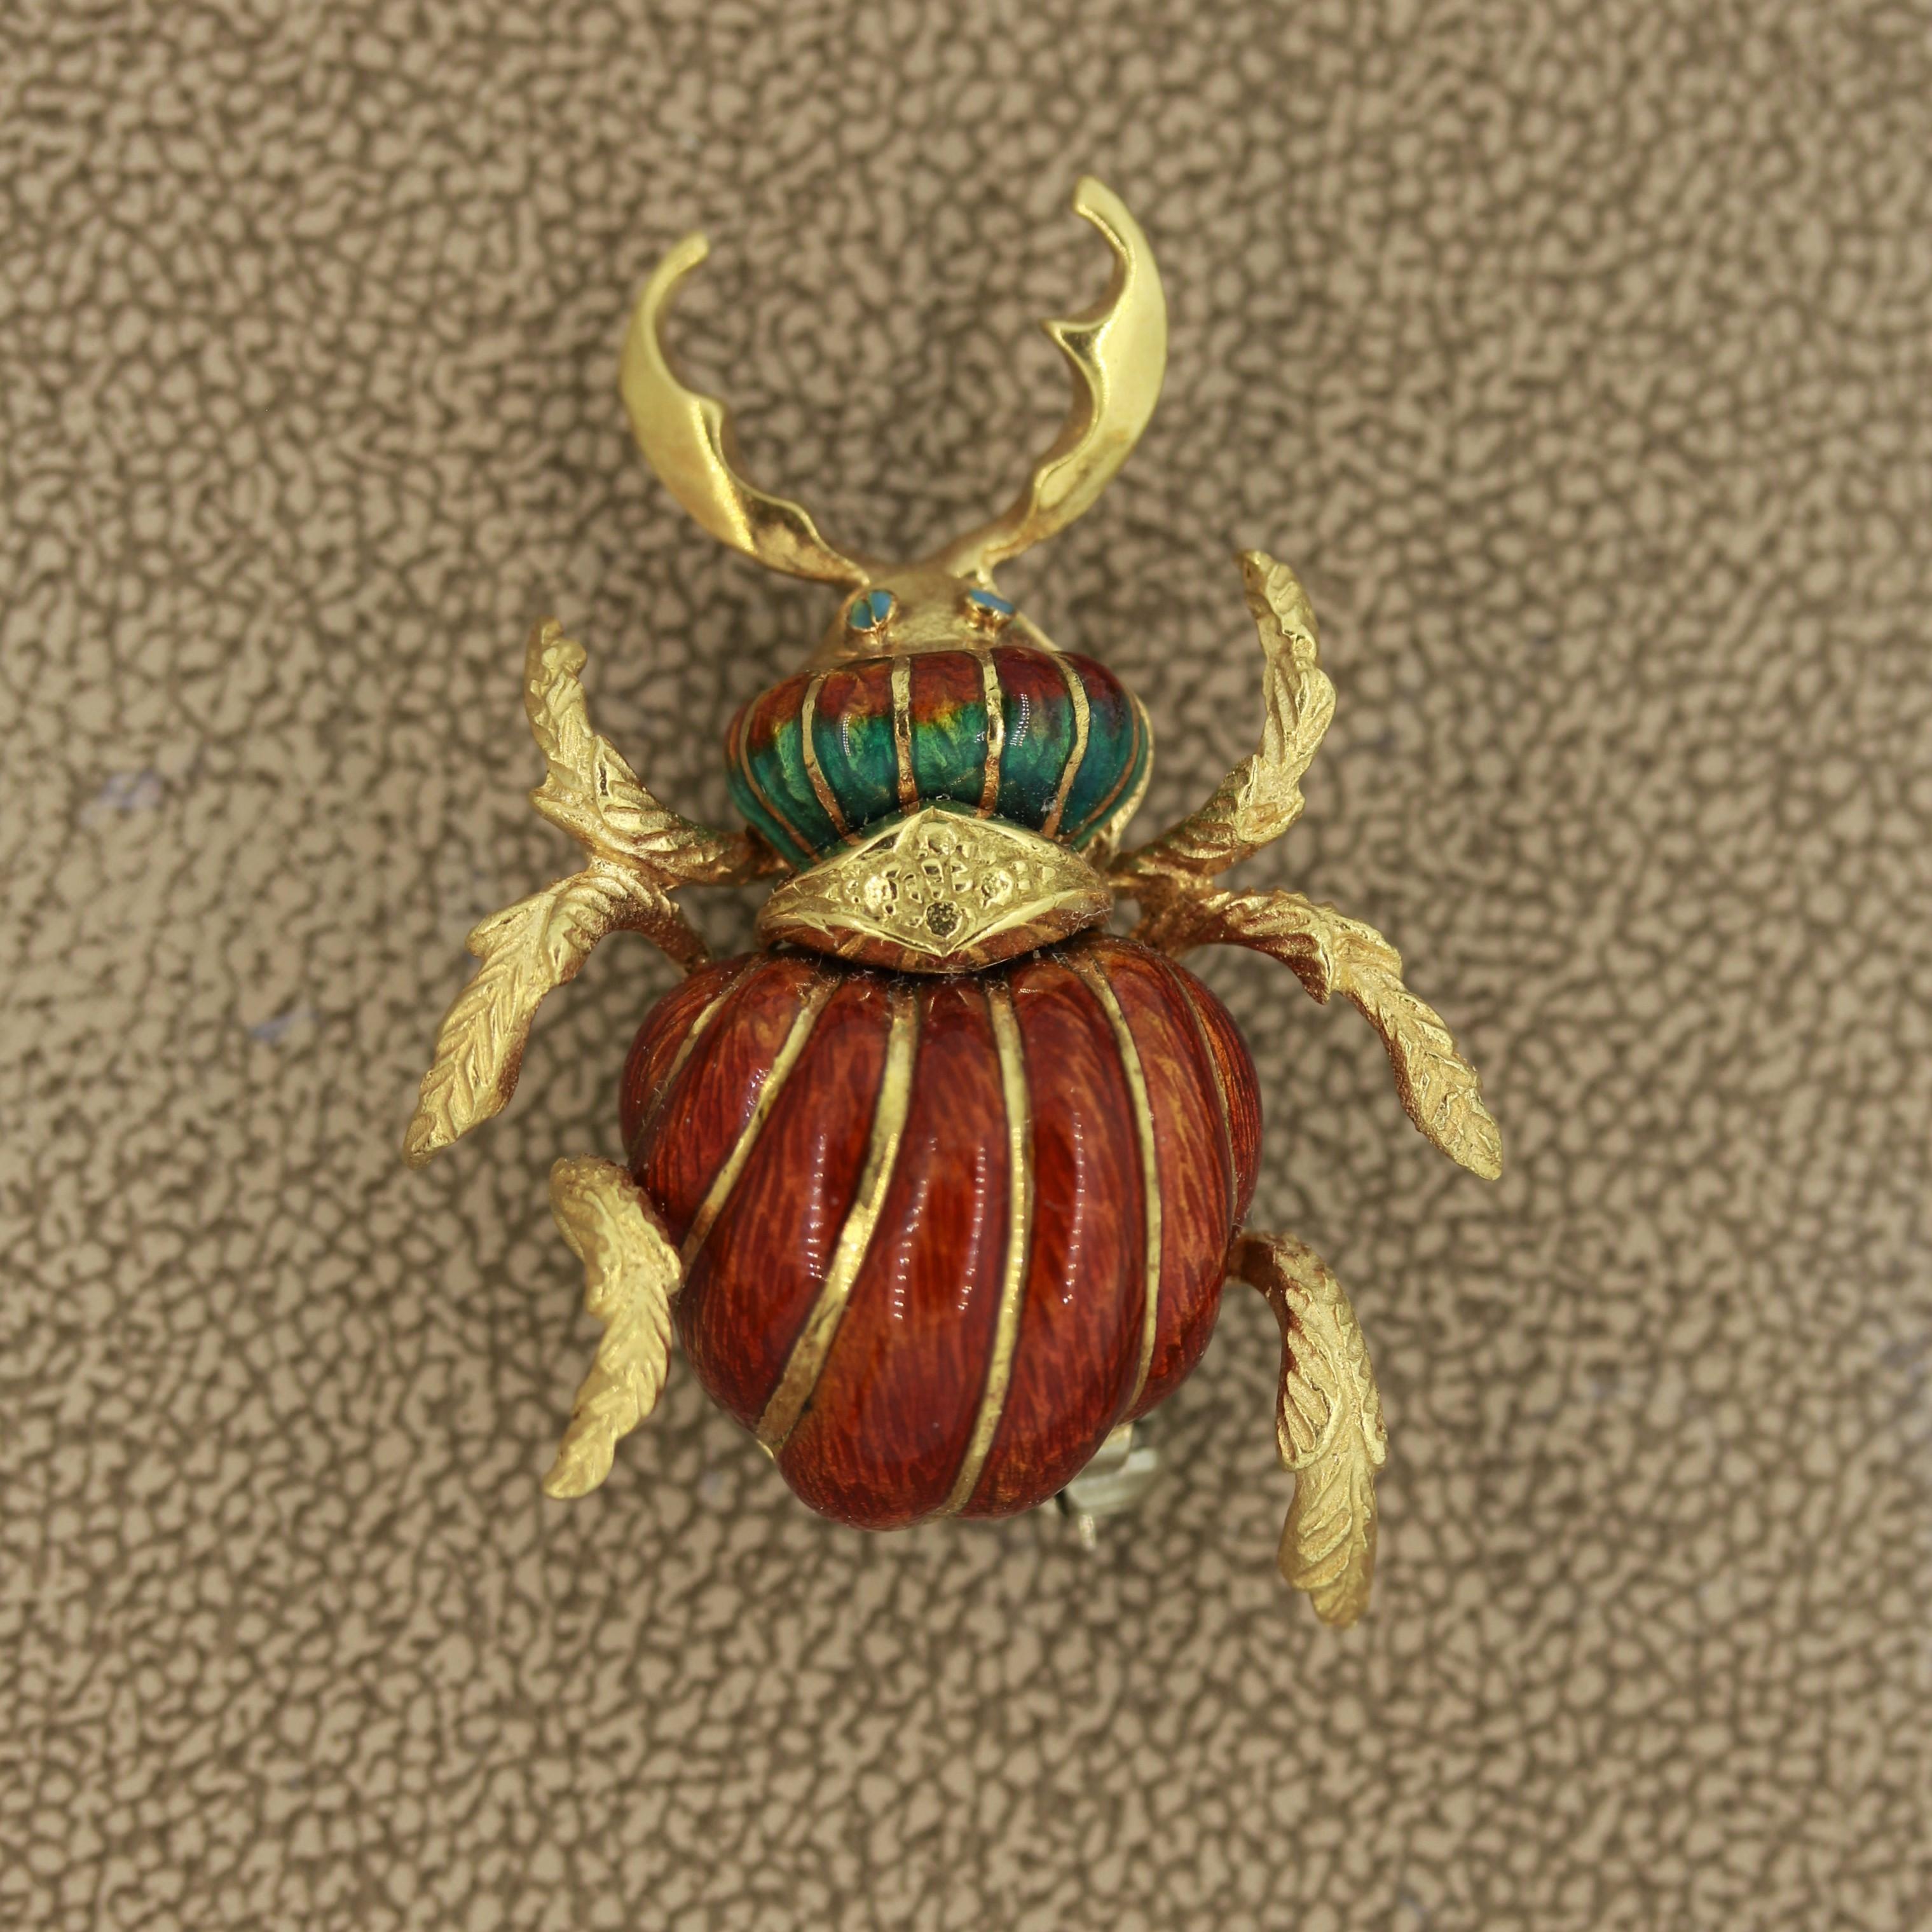 A lovely Italian made brooch from the 1950’s depicting a mighty horned beetle. It is covered in hand painted enamel which add color and realism to the piece. Will make a great addition to any outfit.

Length: 1.5 inches